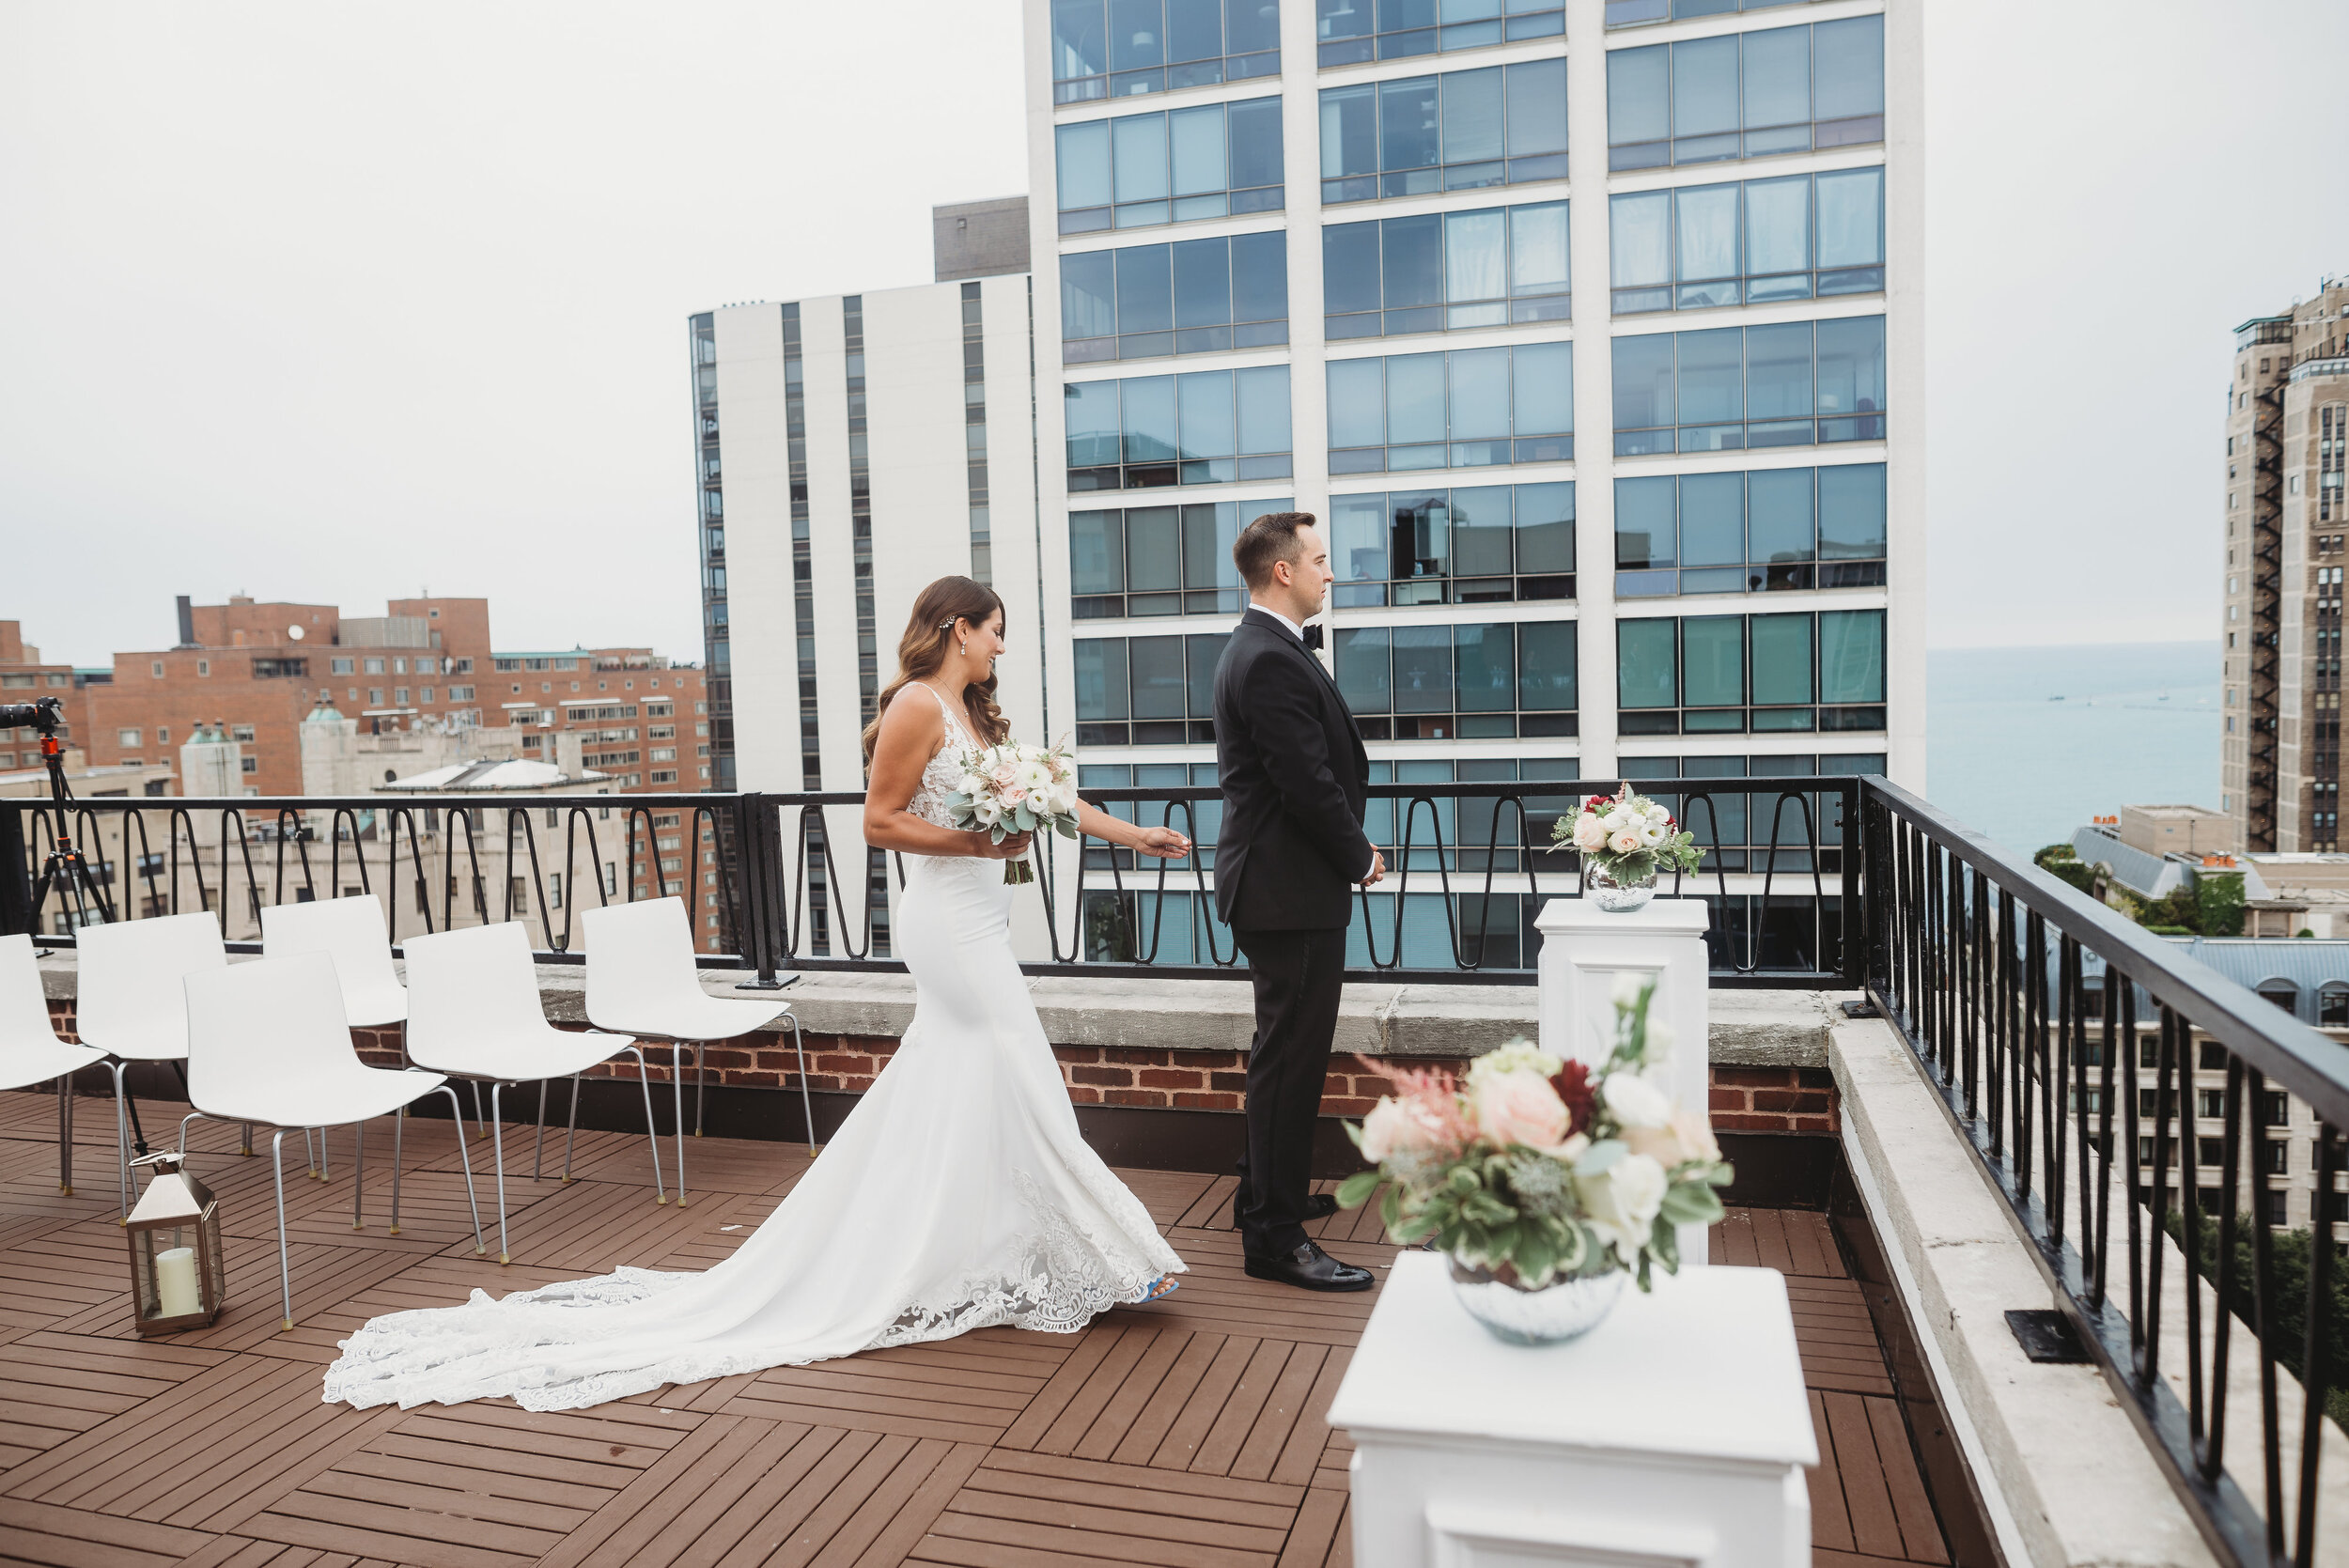 Chicago wedding first look: Modern Chic Chicago History Museum Wedding captured by Girl with the Tattoos. See more wedding ideas at CHItheeWED.com!